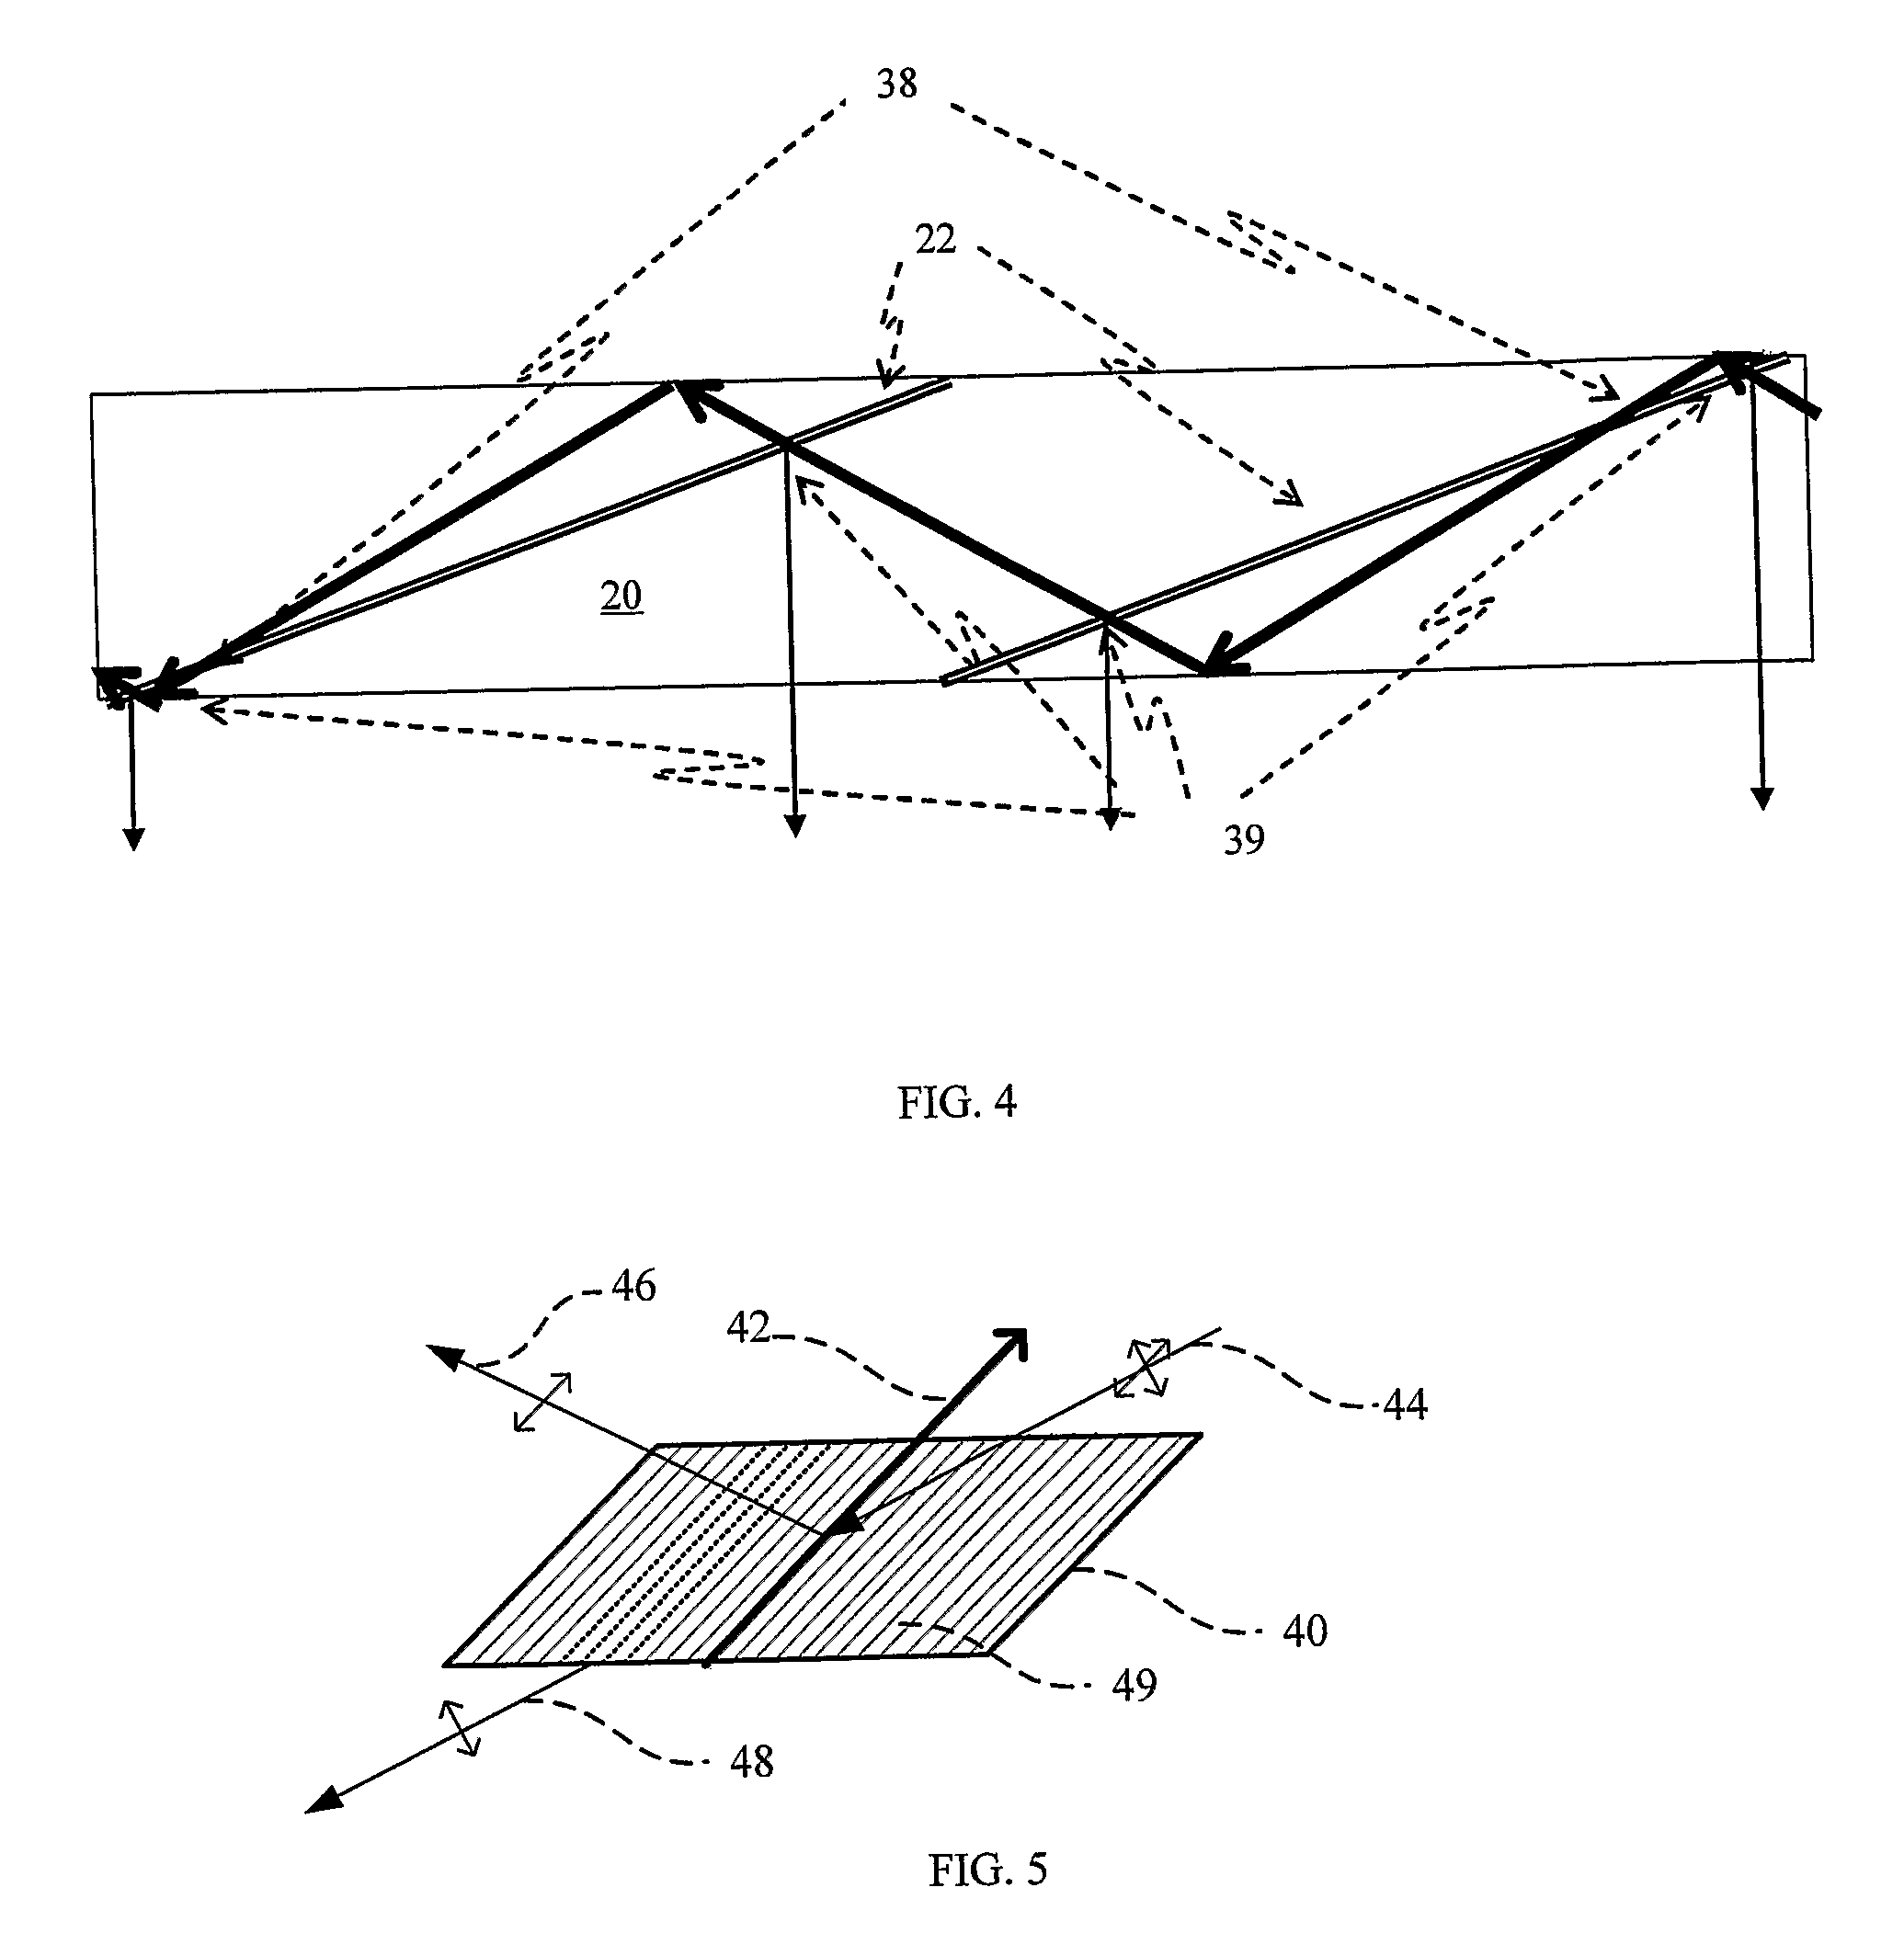 Substrate-guided optical device particularly for vision enhanced optical systems